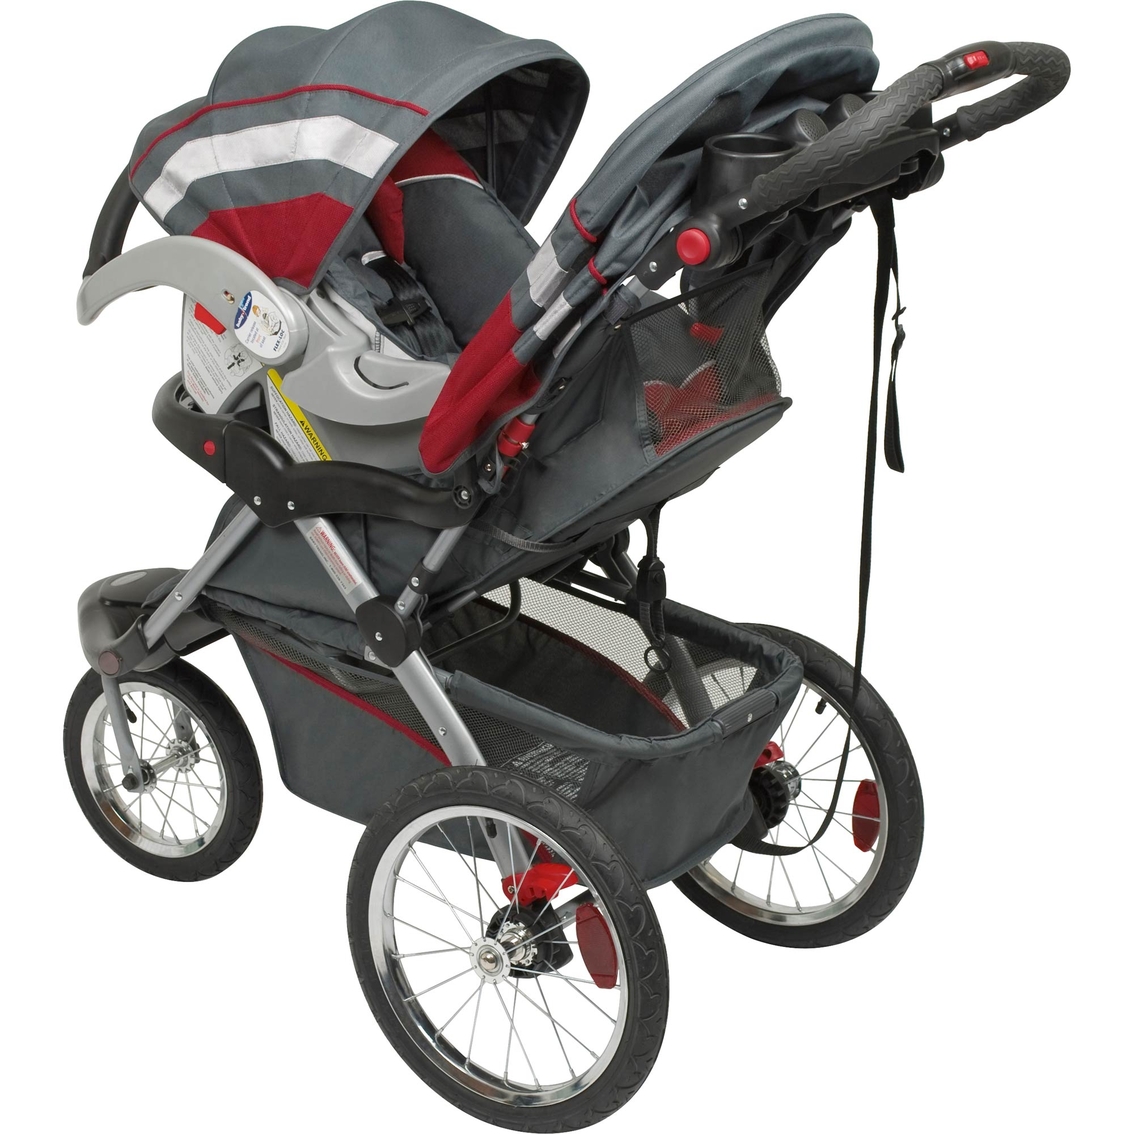 Baby Trend Expedition ELX Jogging Stroller and Car Seat 2 pc. Travel System - Image 2 of 4